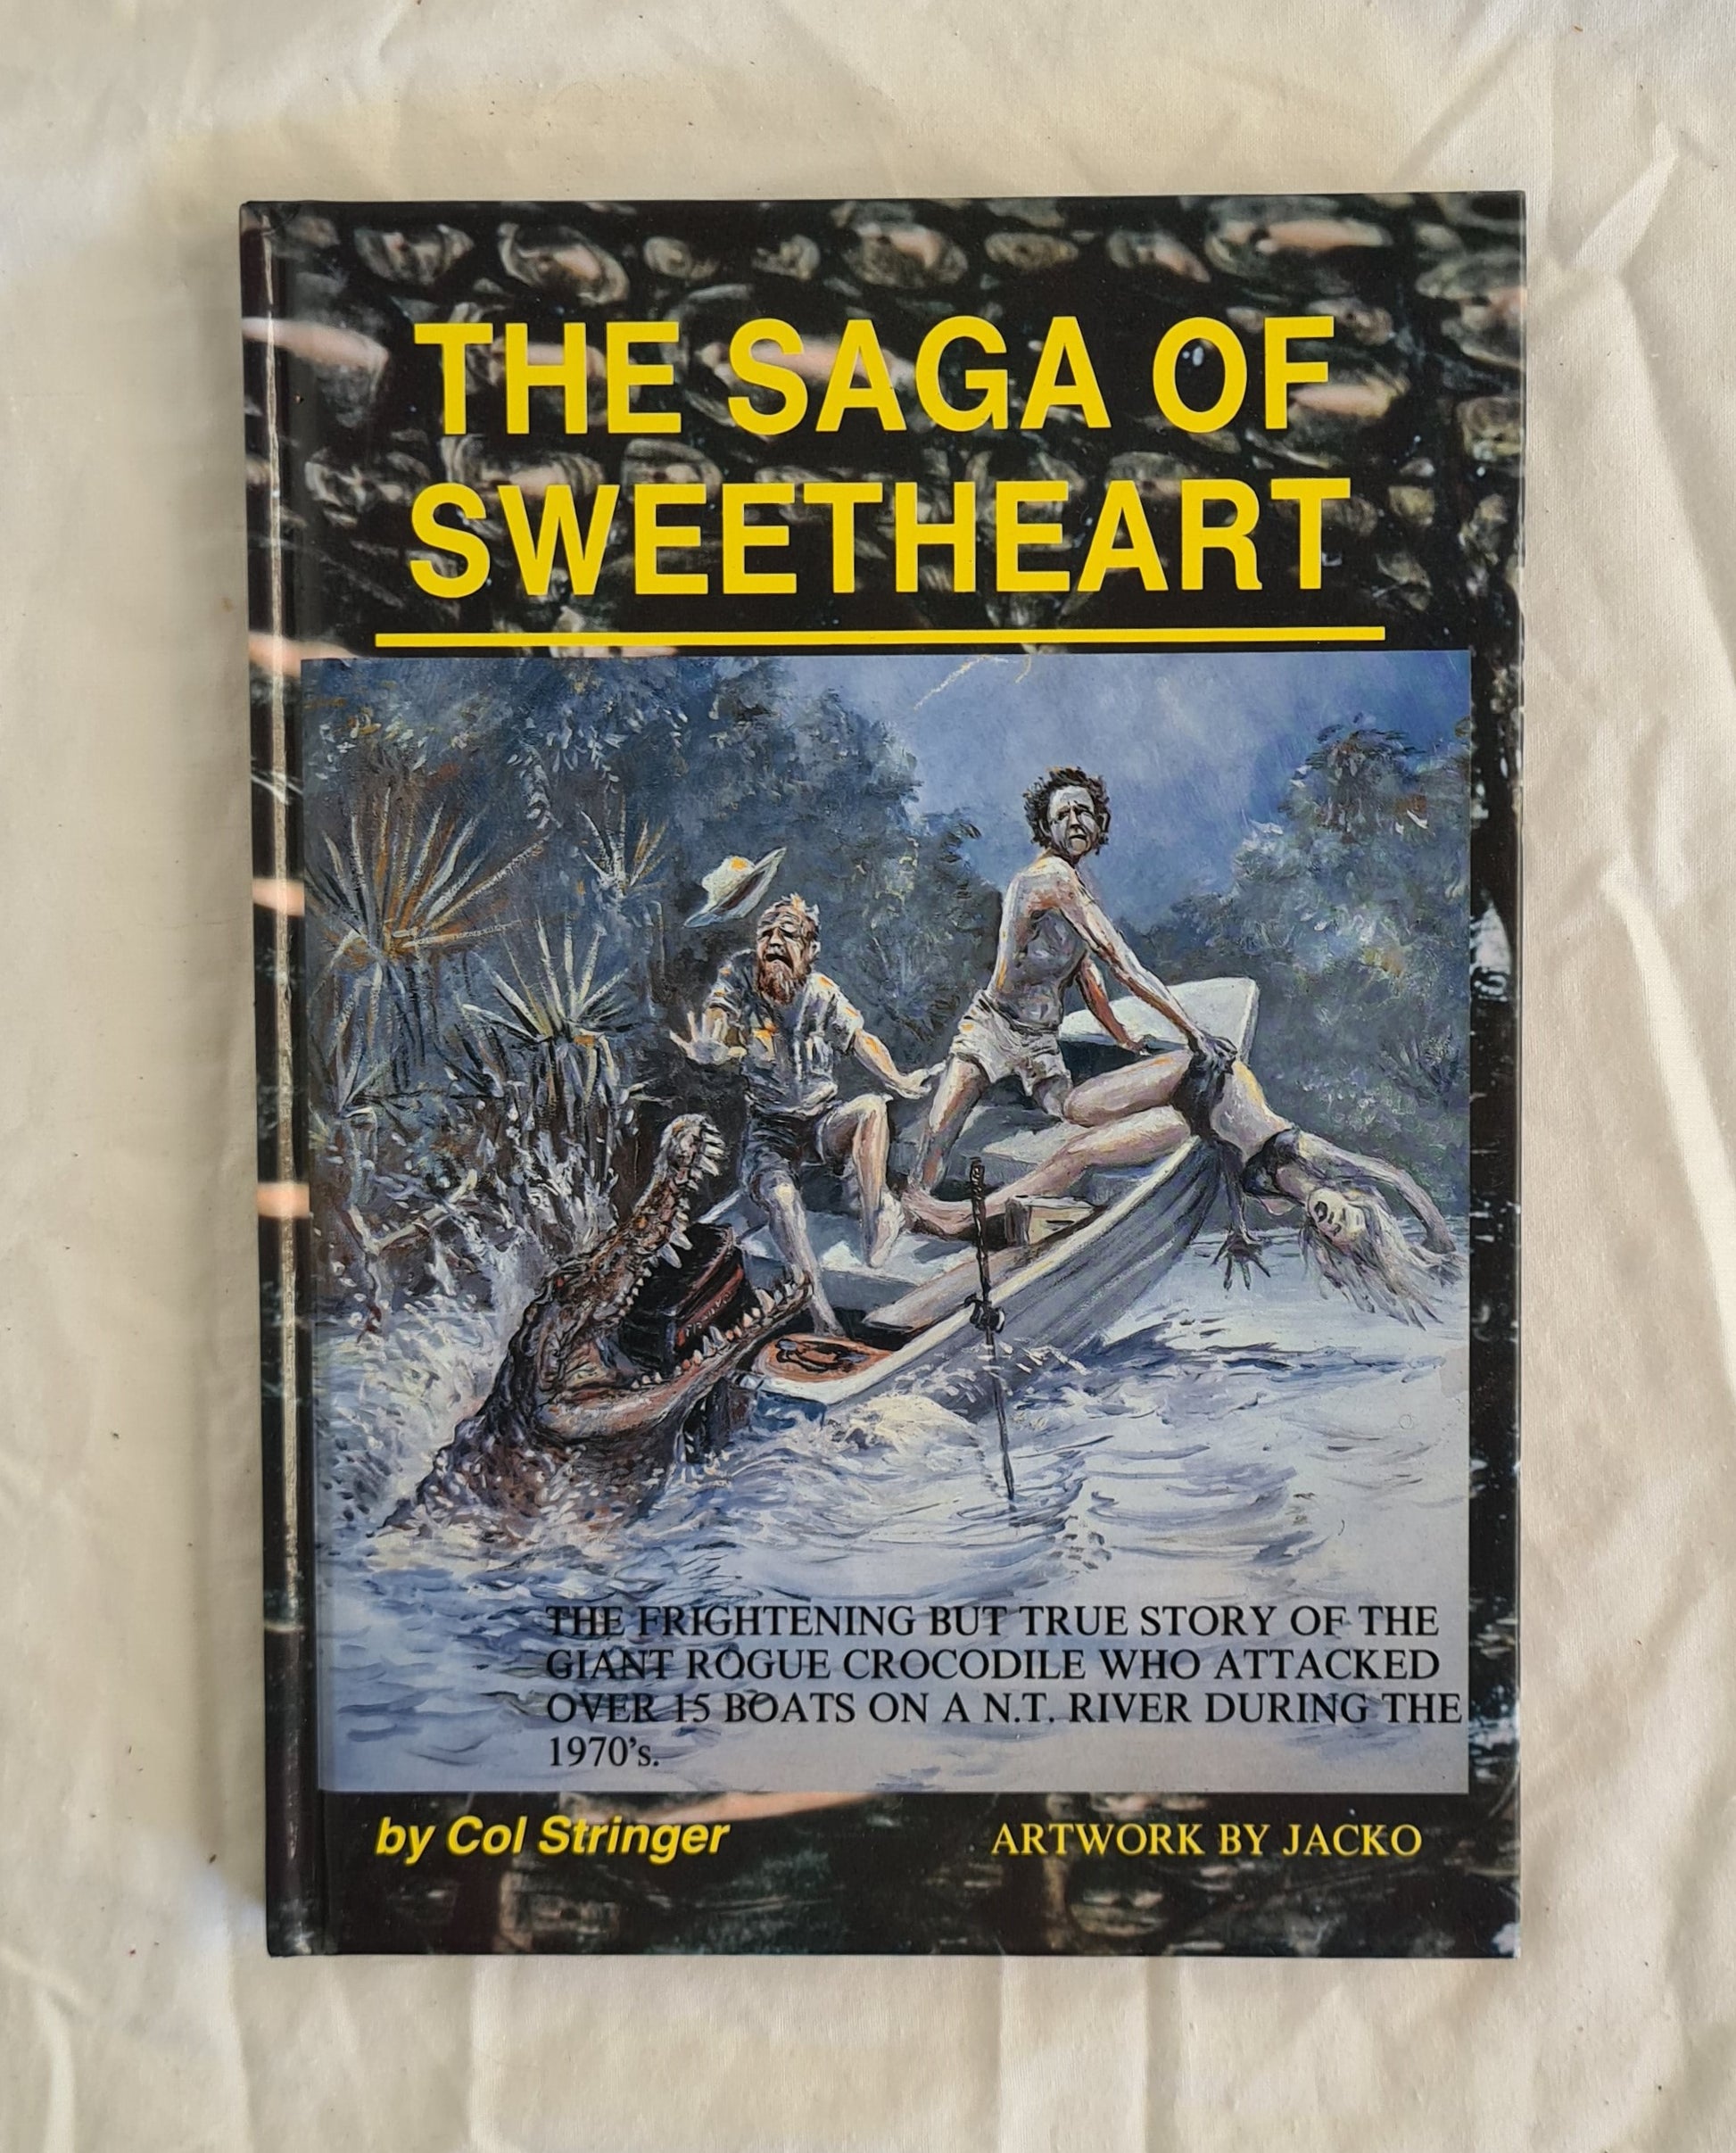 The Saga of Sweetheart  The frightening but true story of the giant rogue crocodile who attacked over 15 boats on a N.T. river during the 1970’s  by Col Stringer  Artwork by Jacko